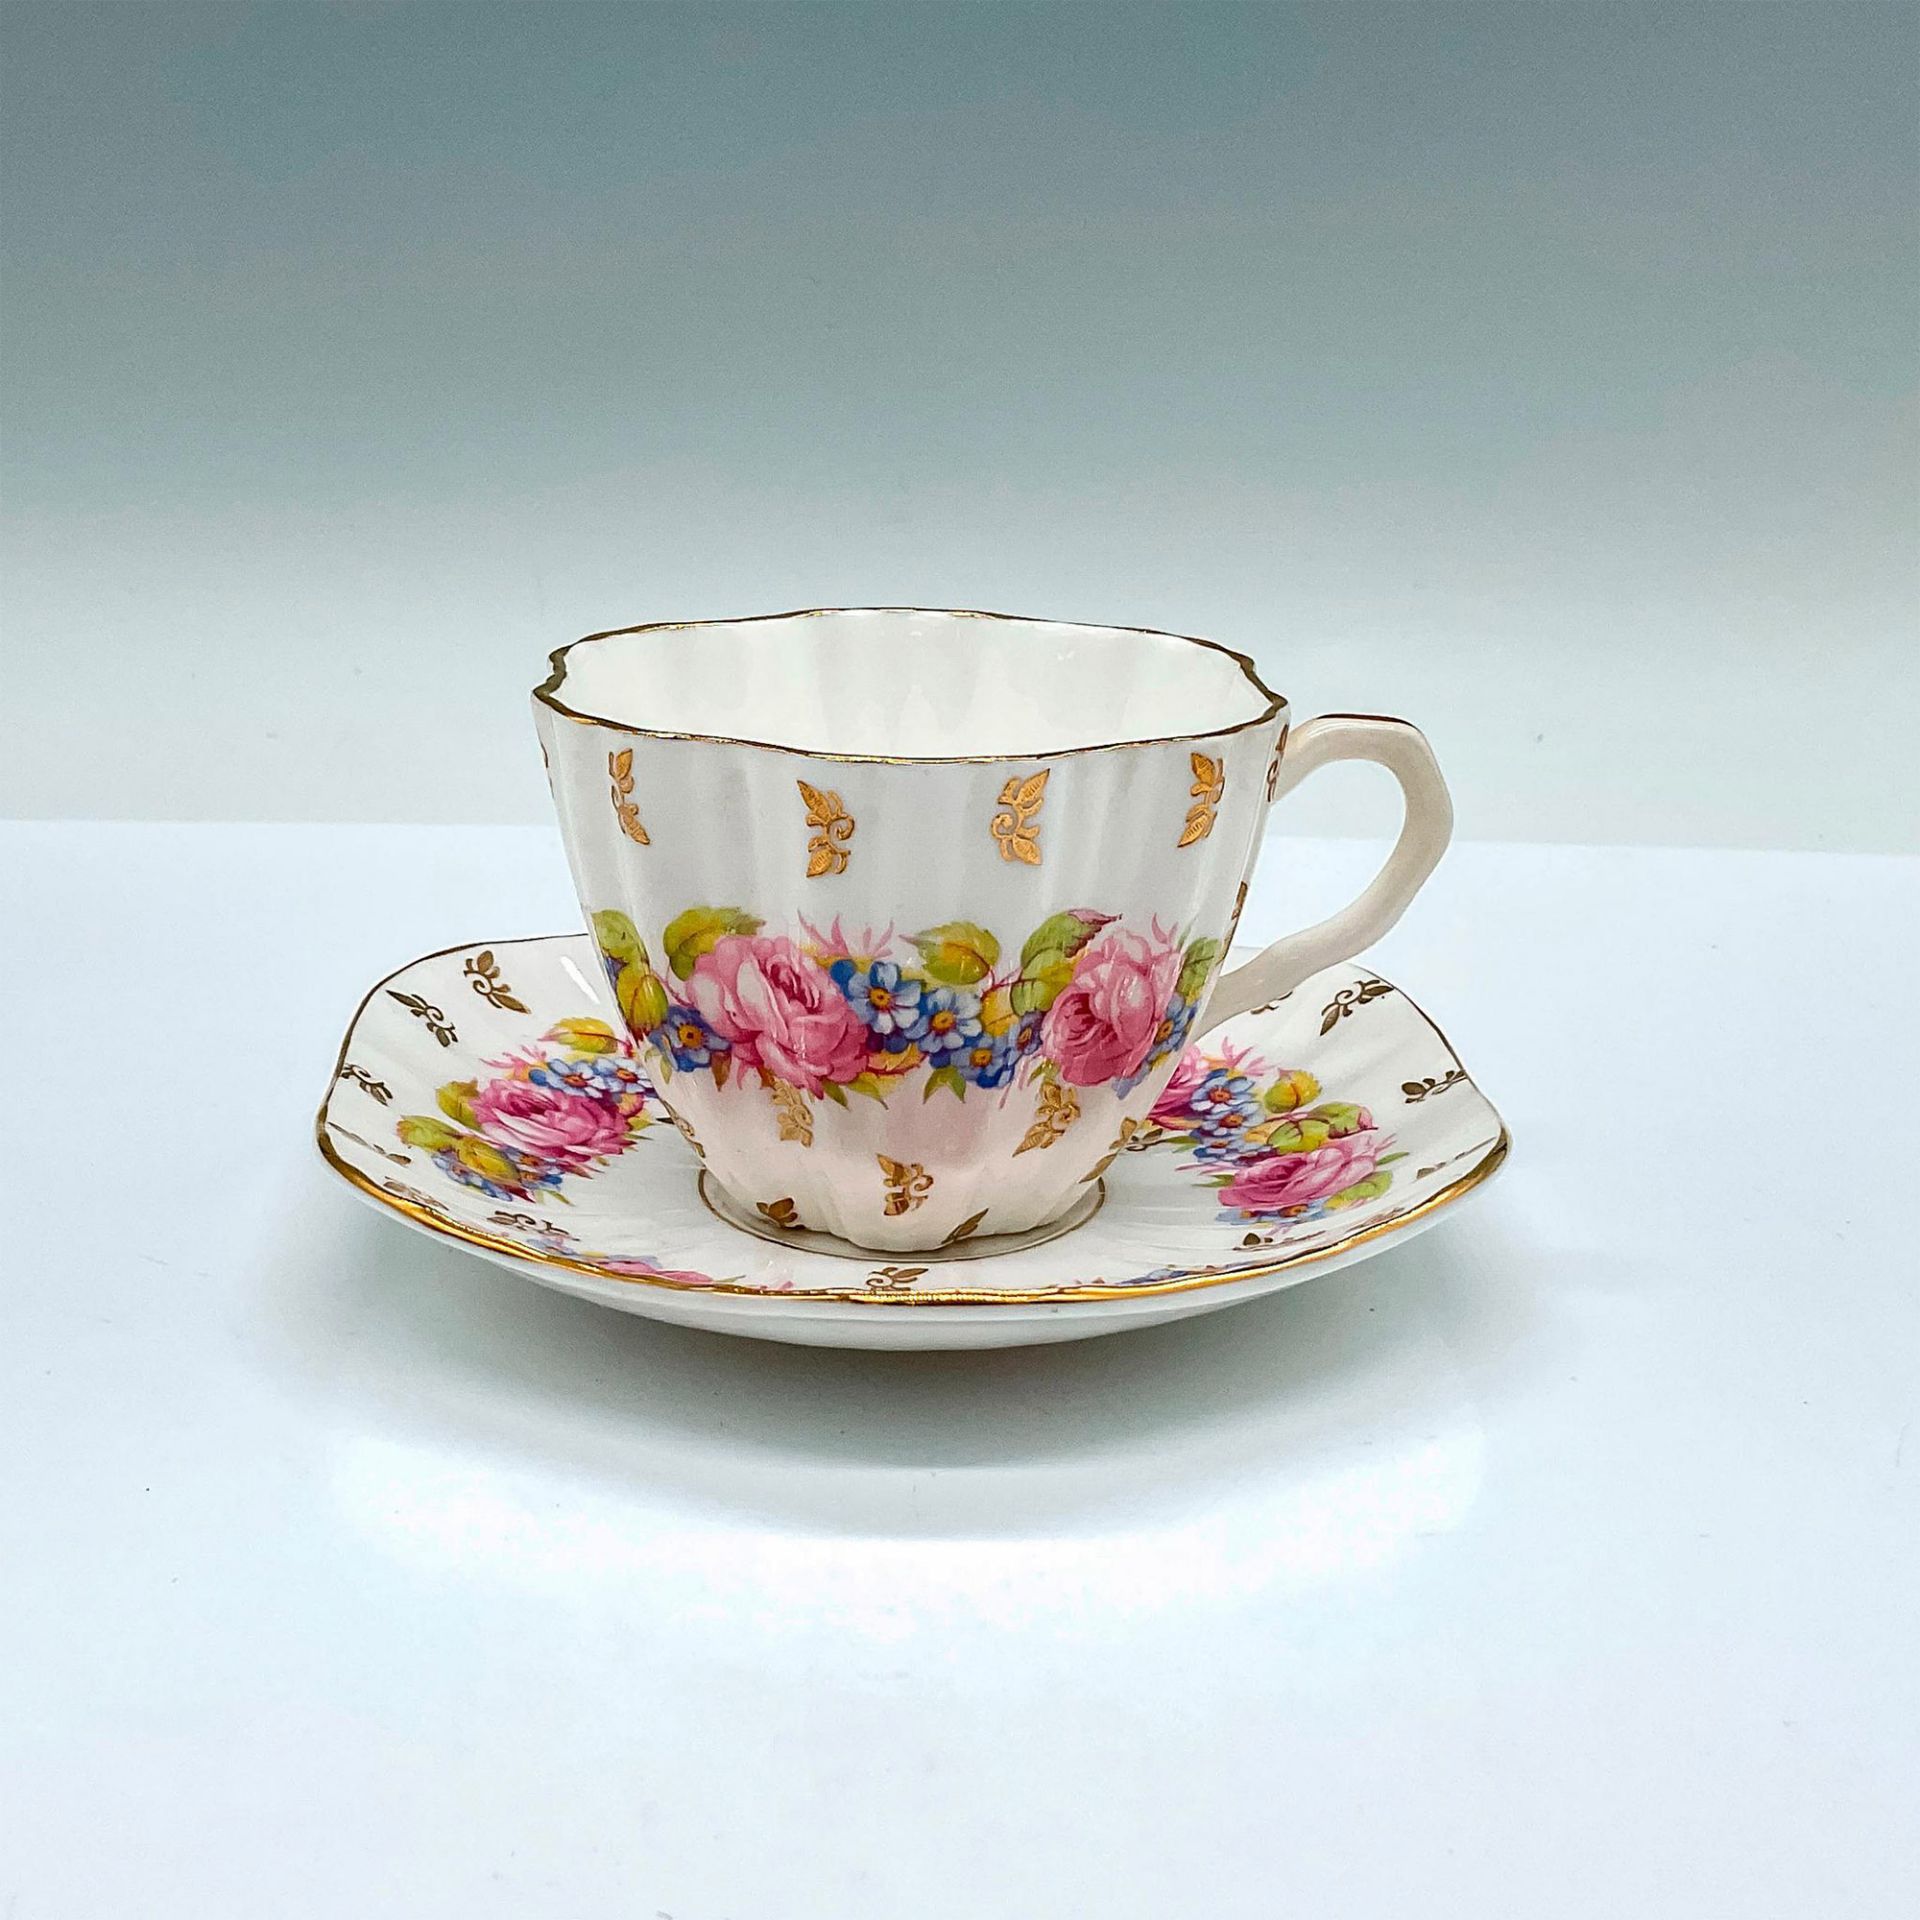 2pc EB Foley Bone China Floral Teacup and Saucer